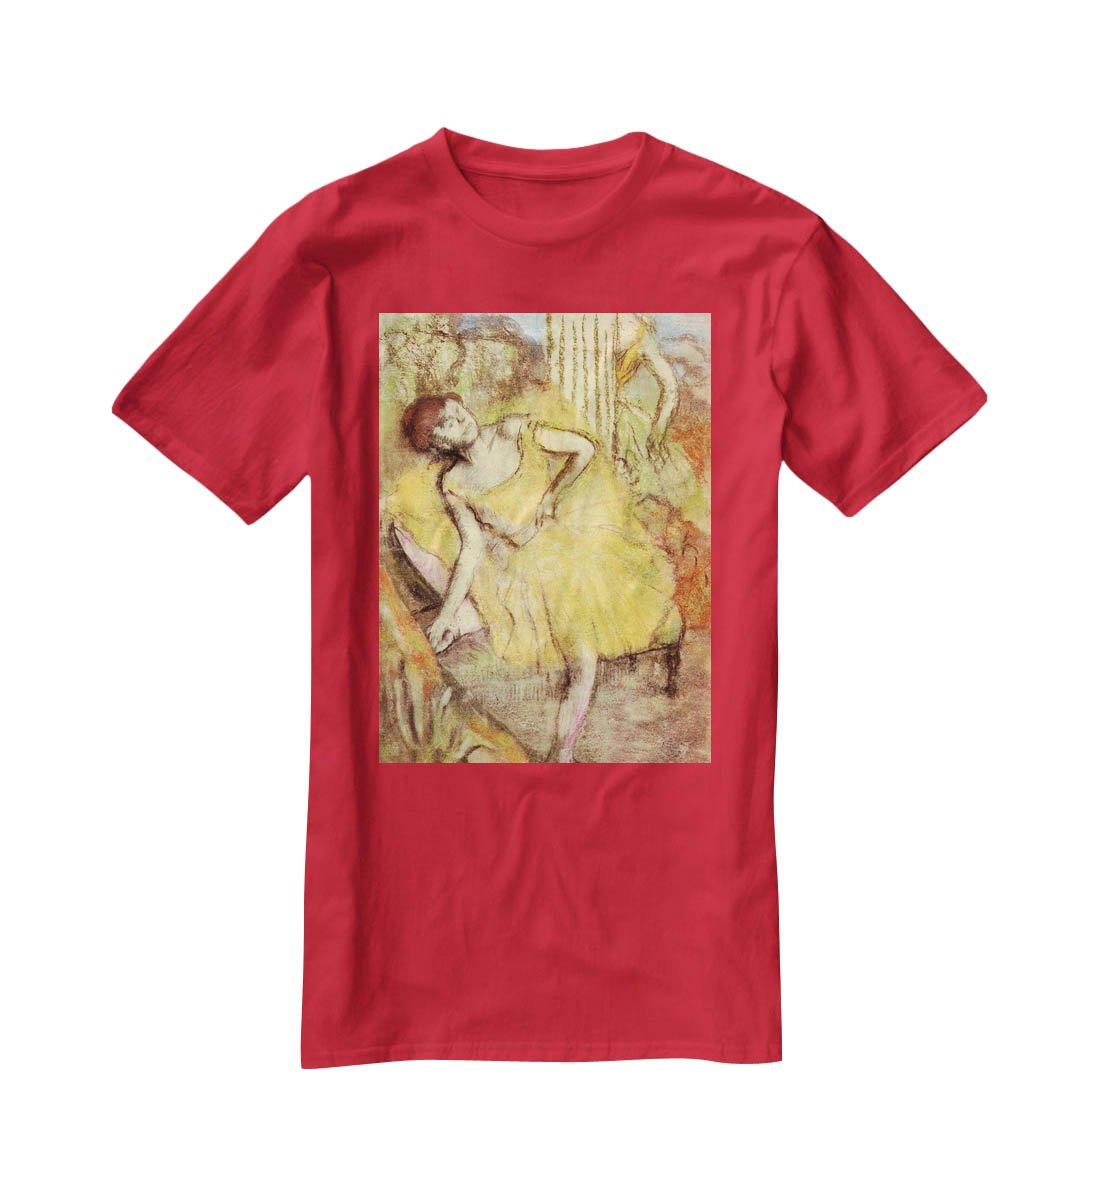 Sitting dancer with the right leg up by Degas T-Shirt - Canvas Art Rocks - 4